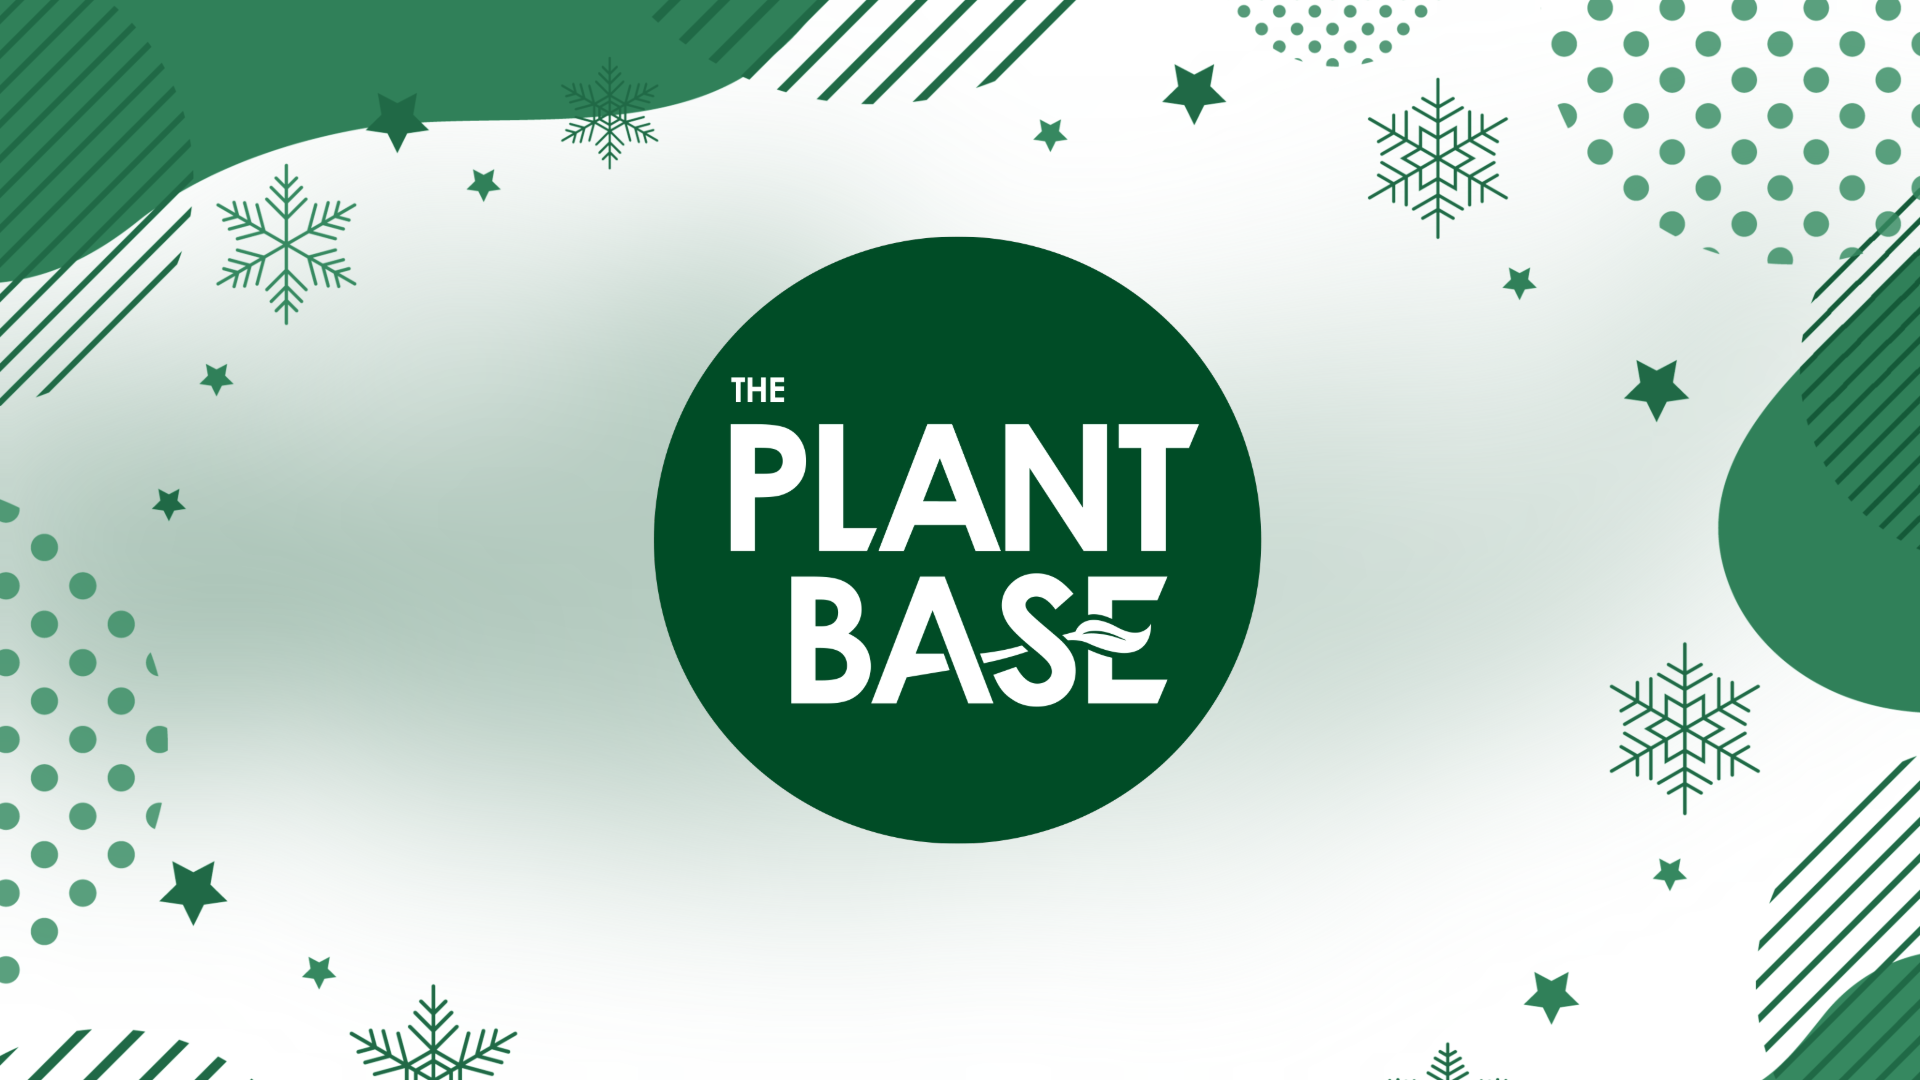 Happy holidays from The Plant Base!